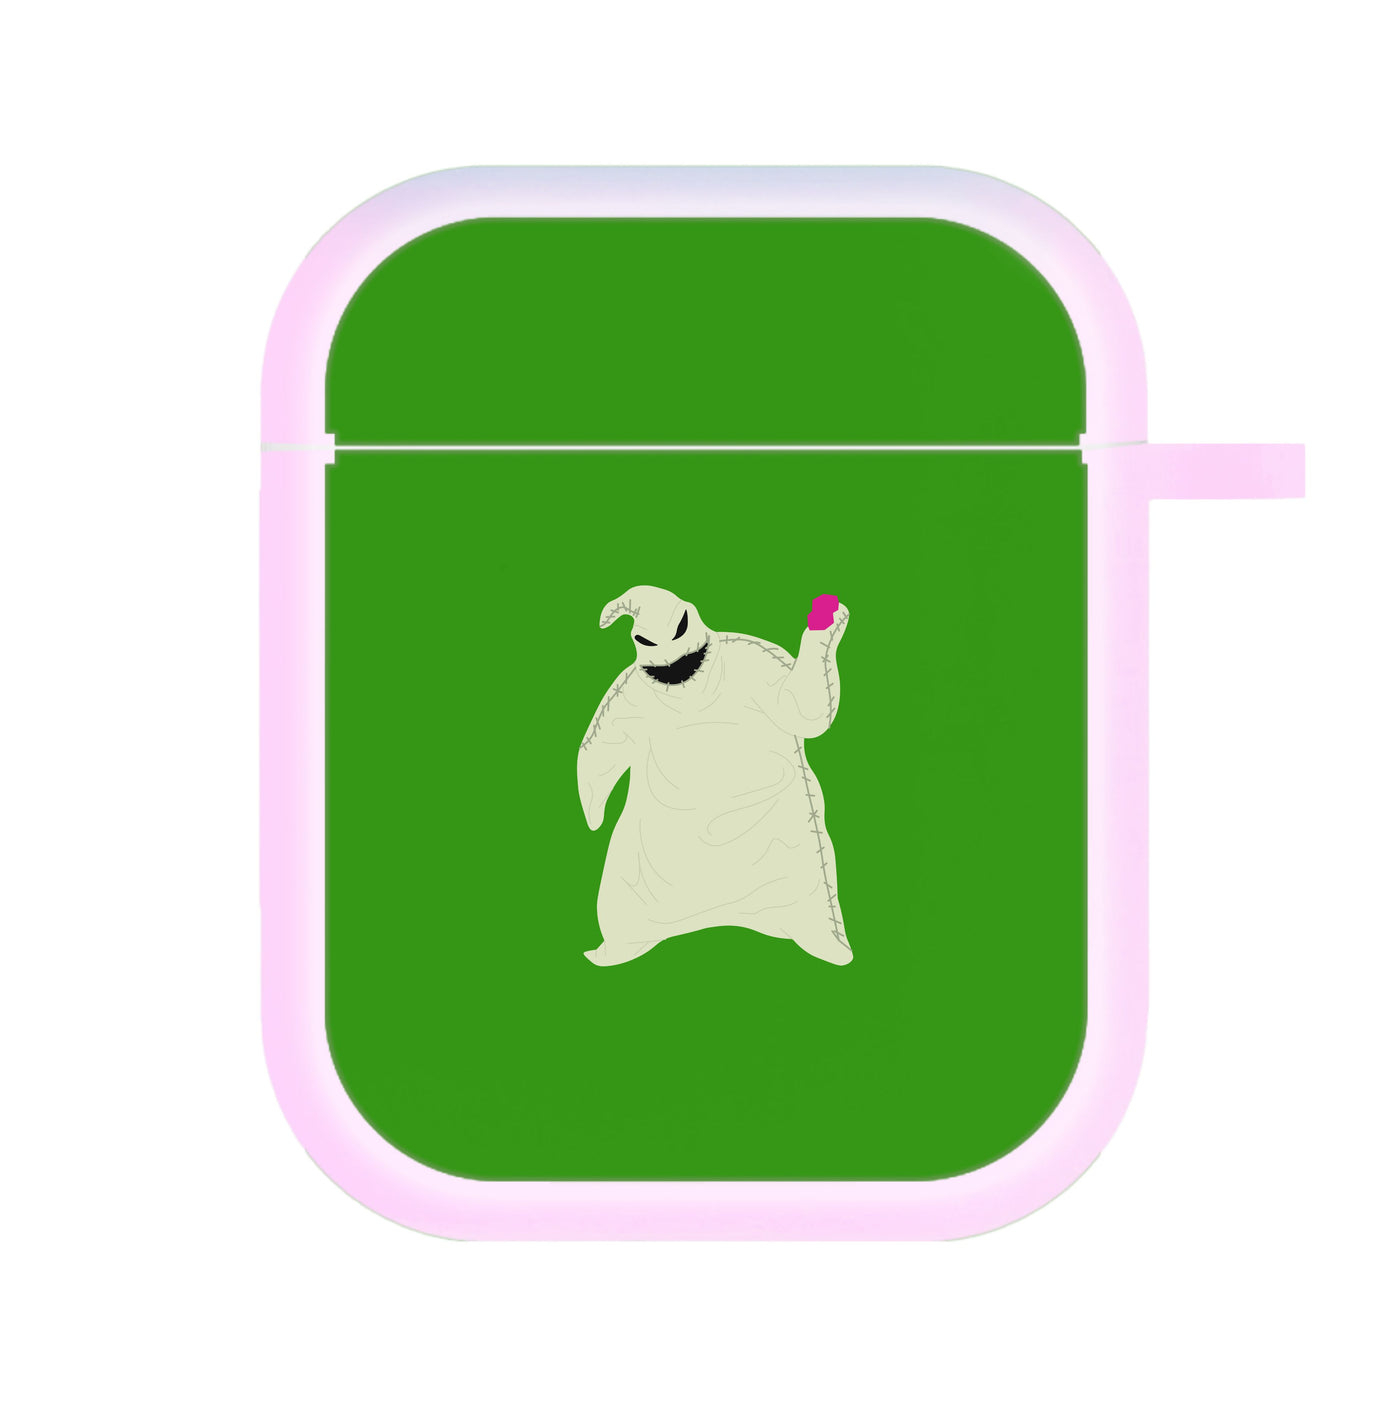 Oogie Boogie Green - Nightmare Before Christmas AirPods Case